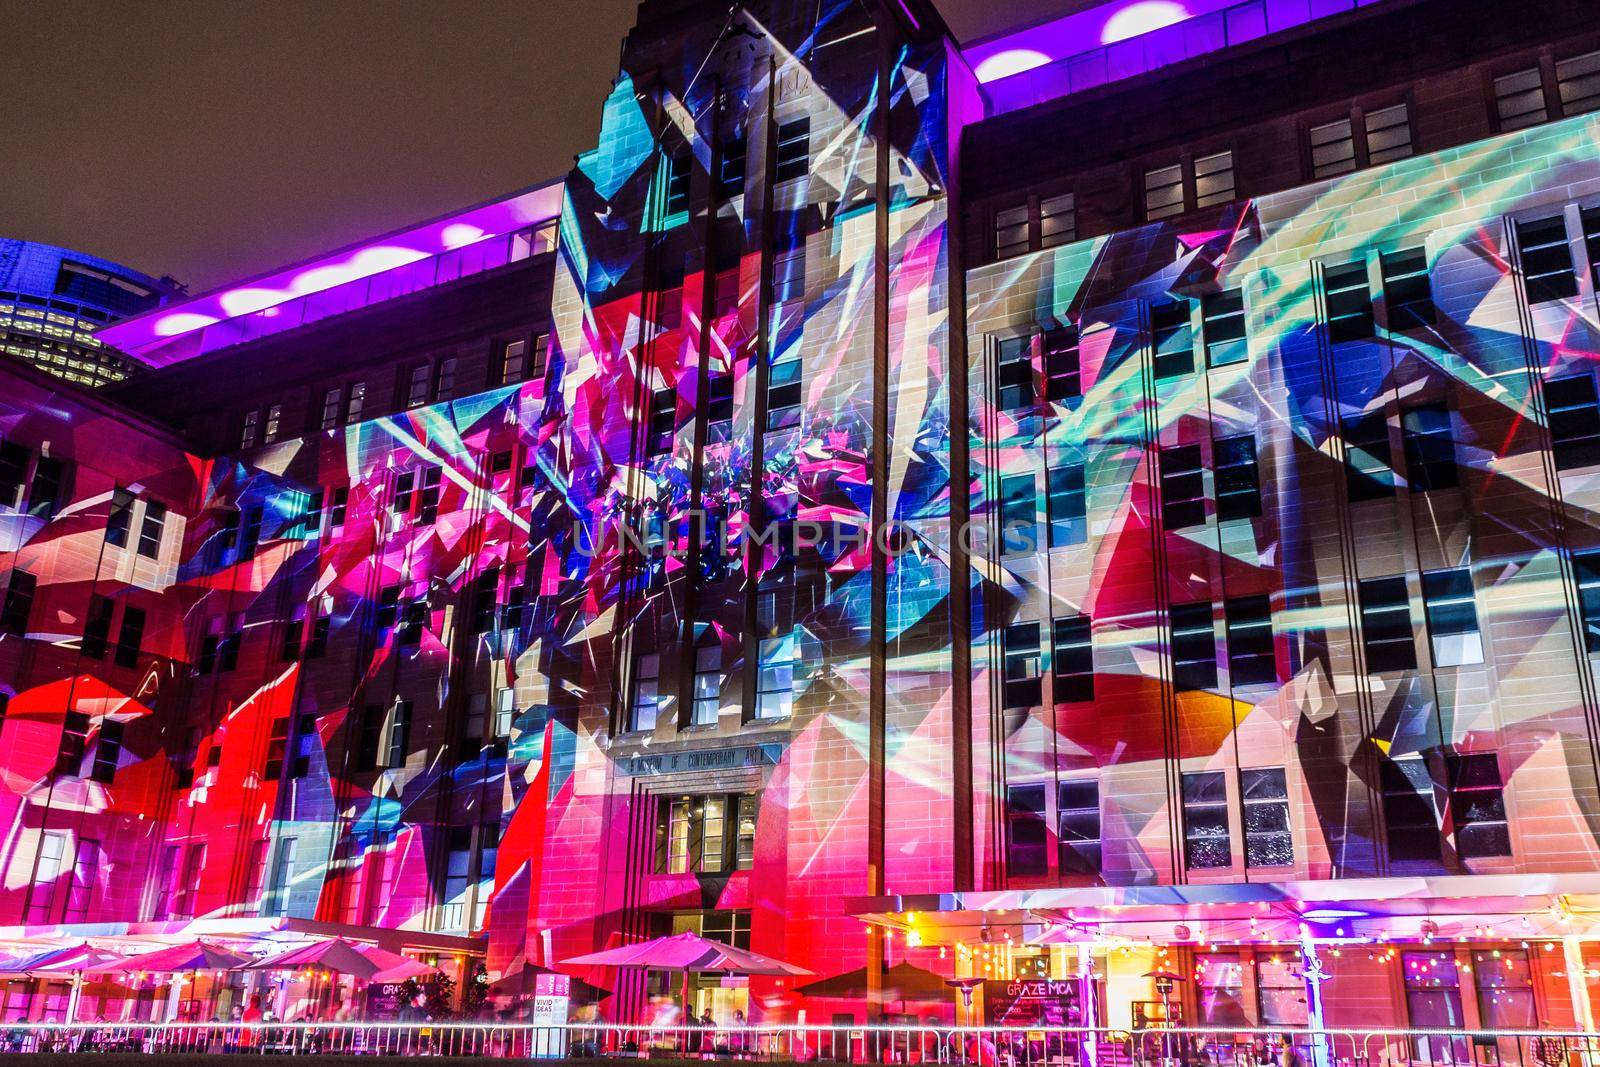 SYDNEY, AUSTRALIA. On May 22, 2015. - An annual outdoor lighting festival with immersive light installations and projections Vivid Sydney the image at Customs House building. by bettercallcurry